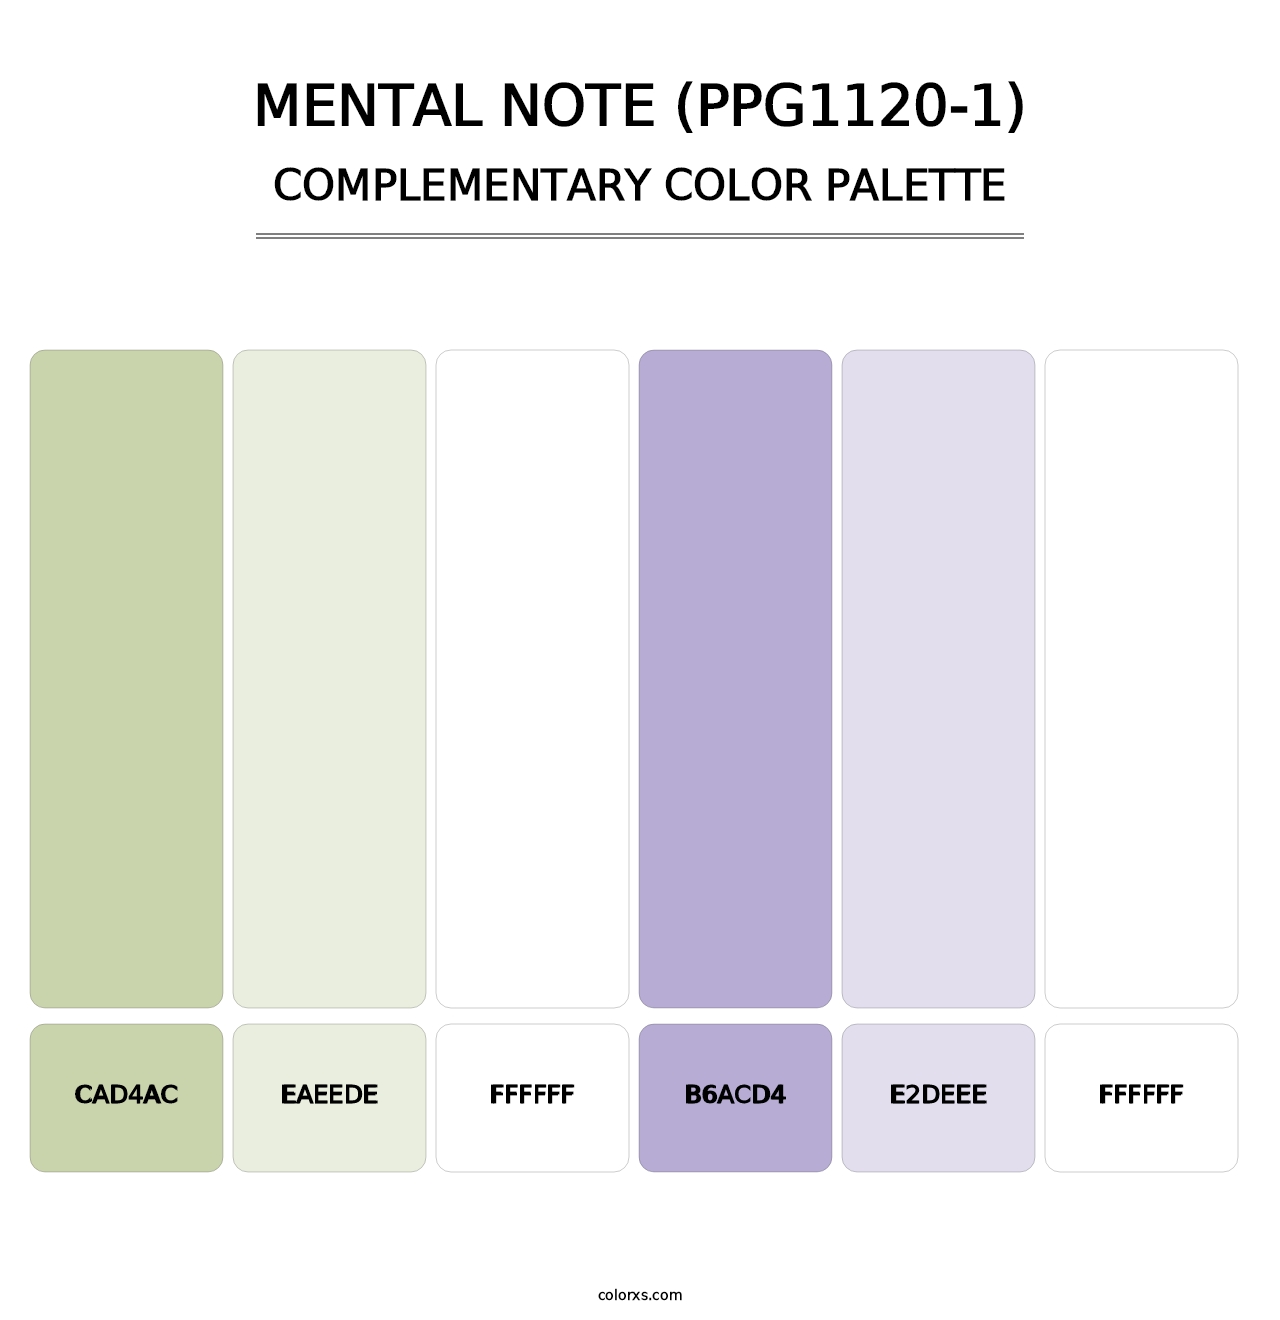 Mental Note (PPG1120-1) - Complementary Color Palette